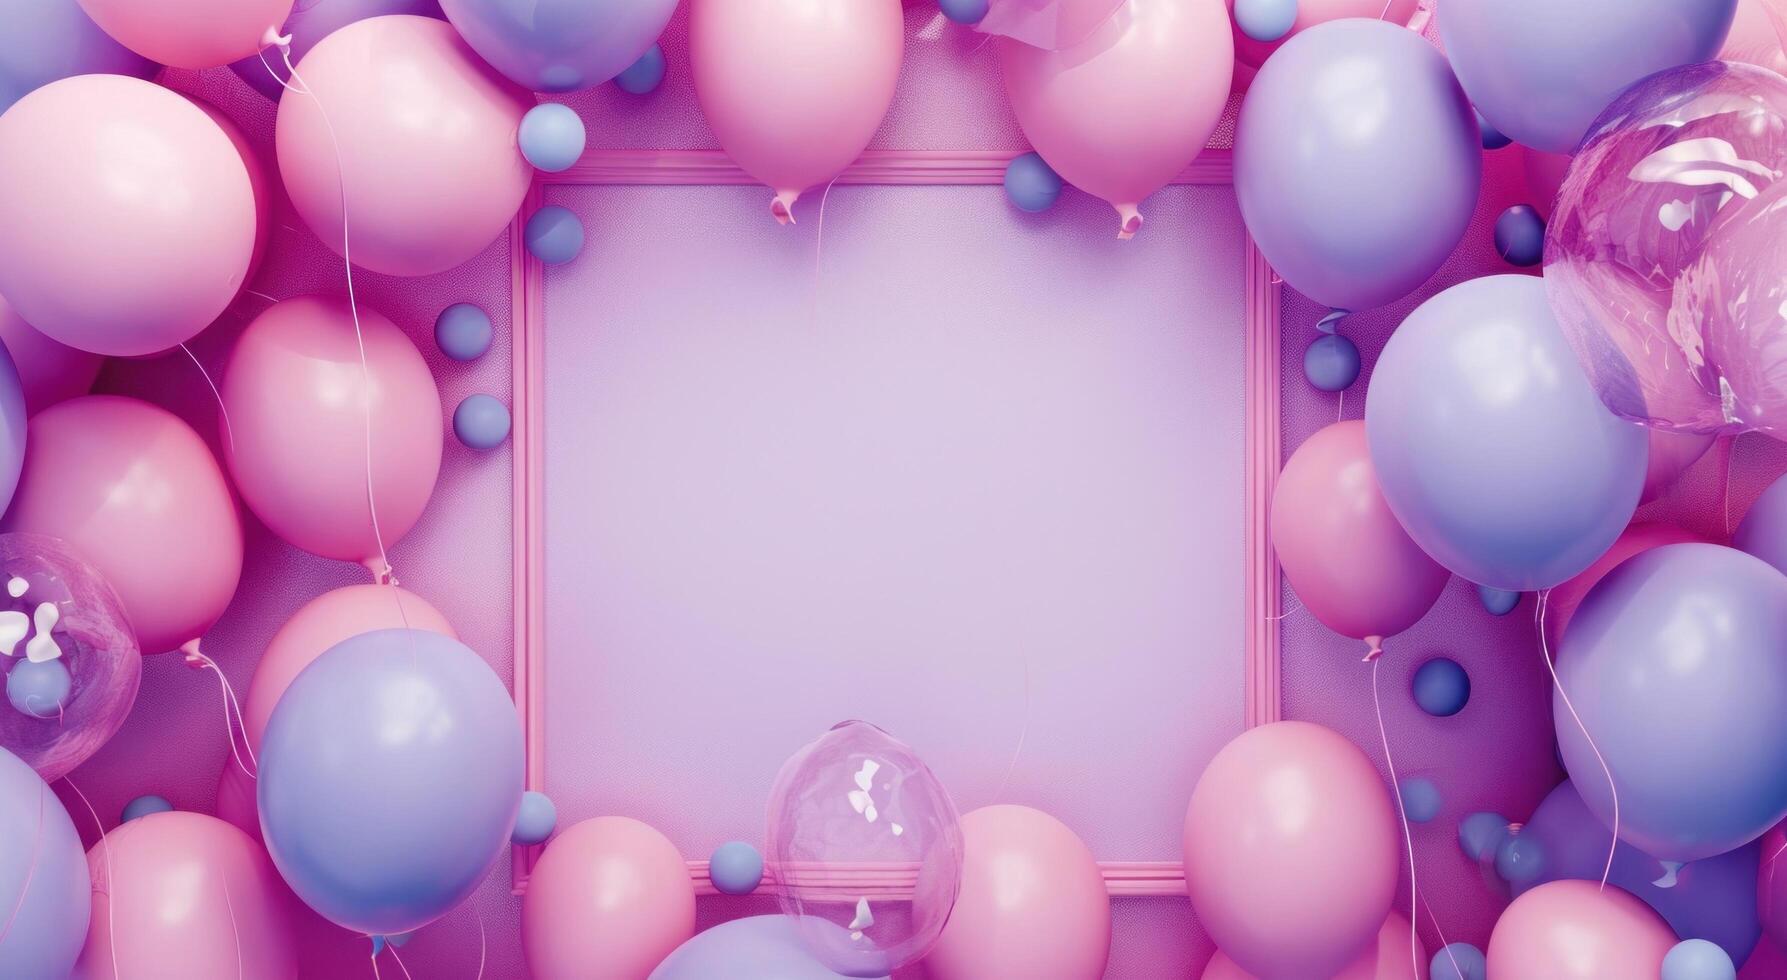 AI generated a pretty pink background with tons of balloons around the square photo